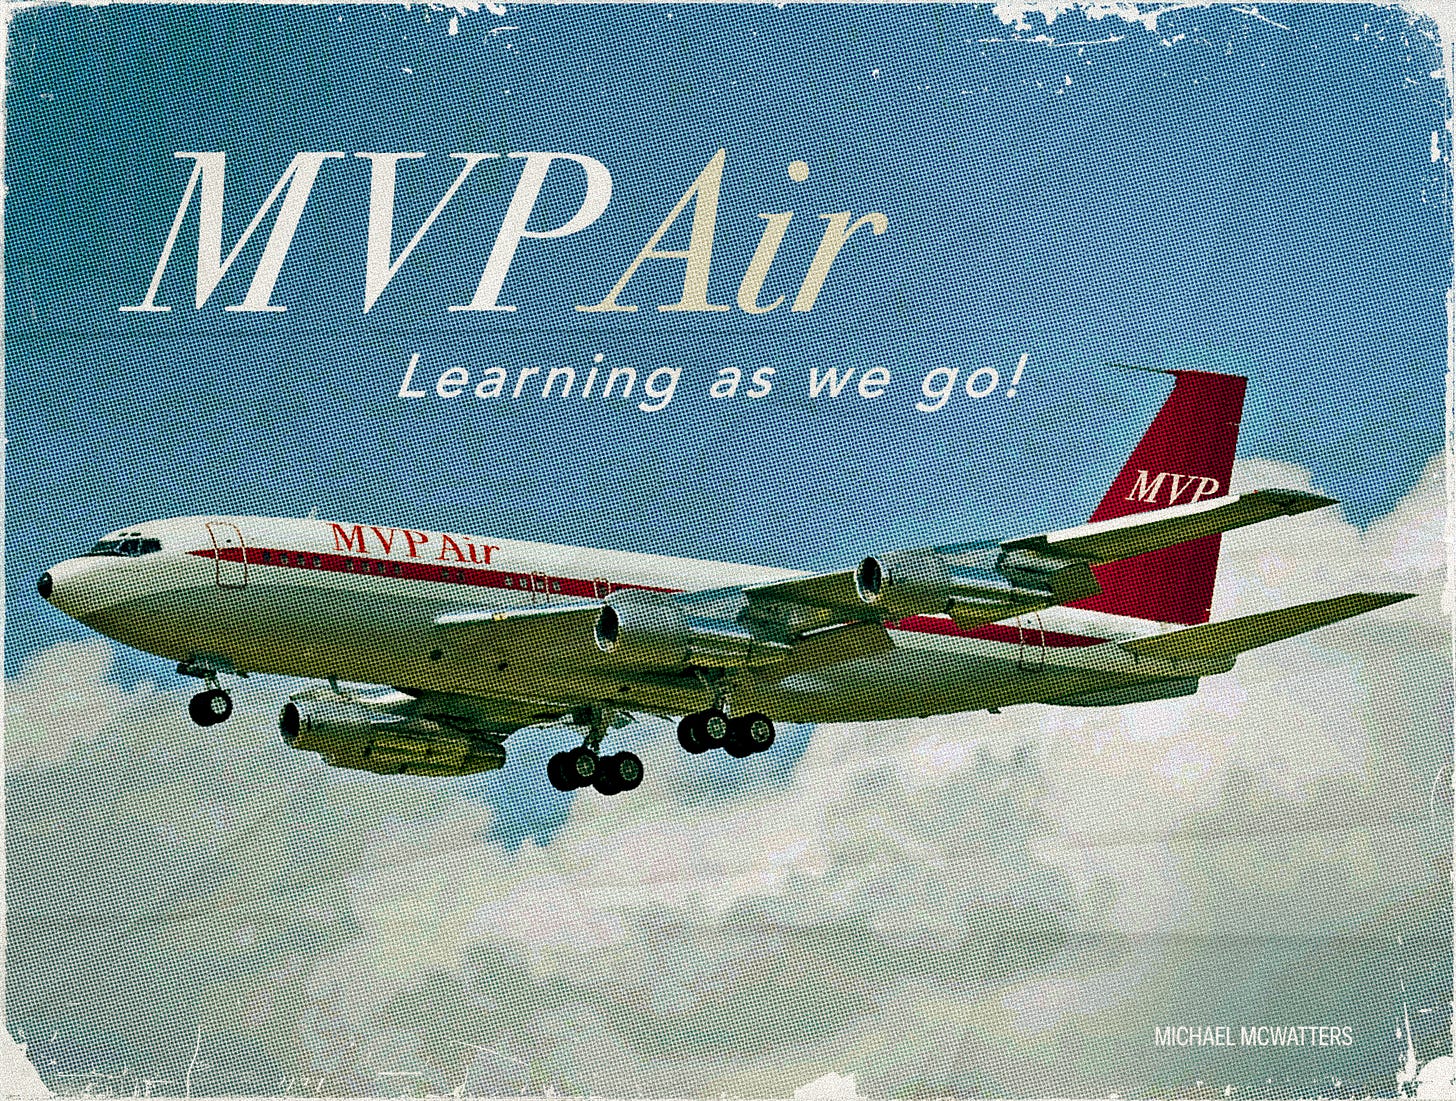 A fictitious retro airline poster with the text, "MVP Air: Learning as we go!"